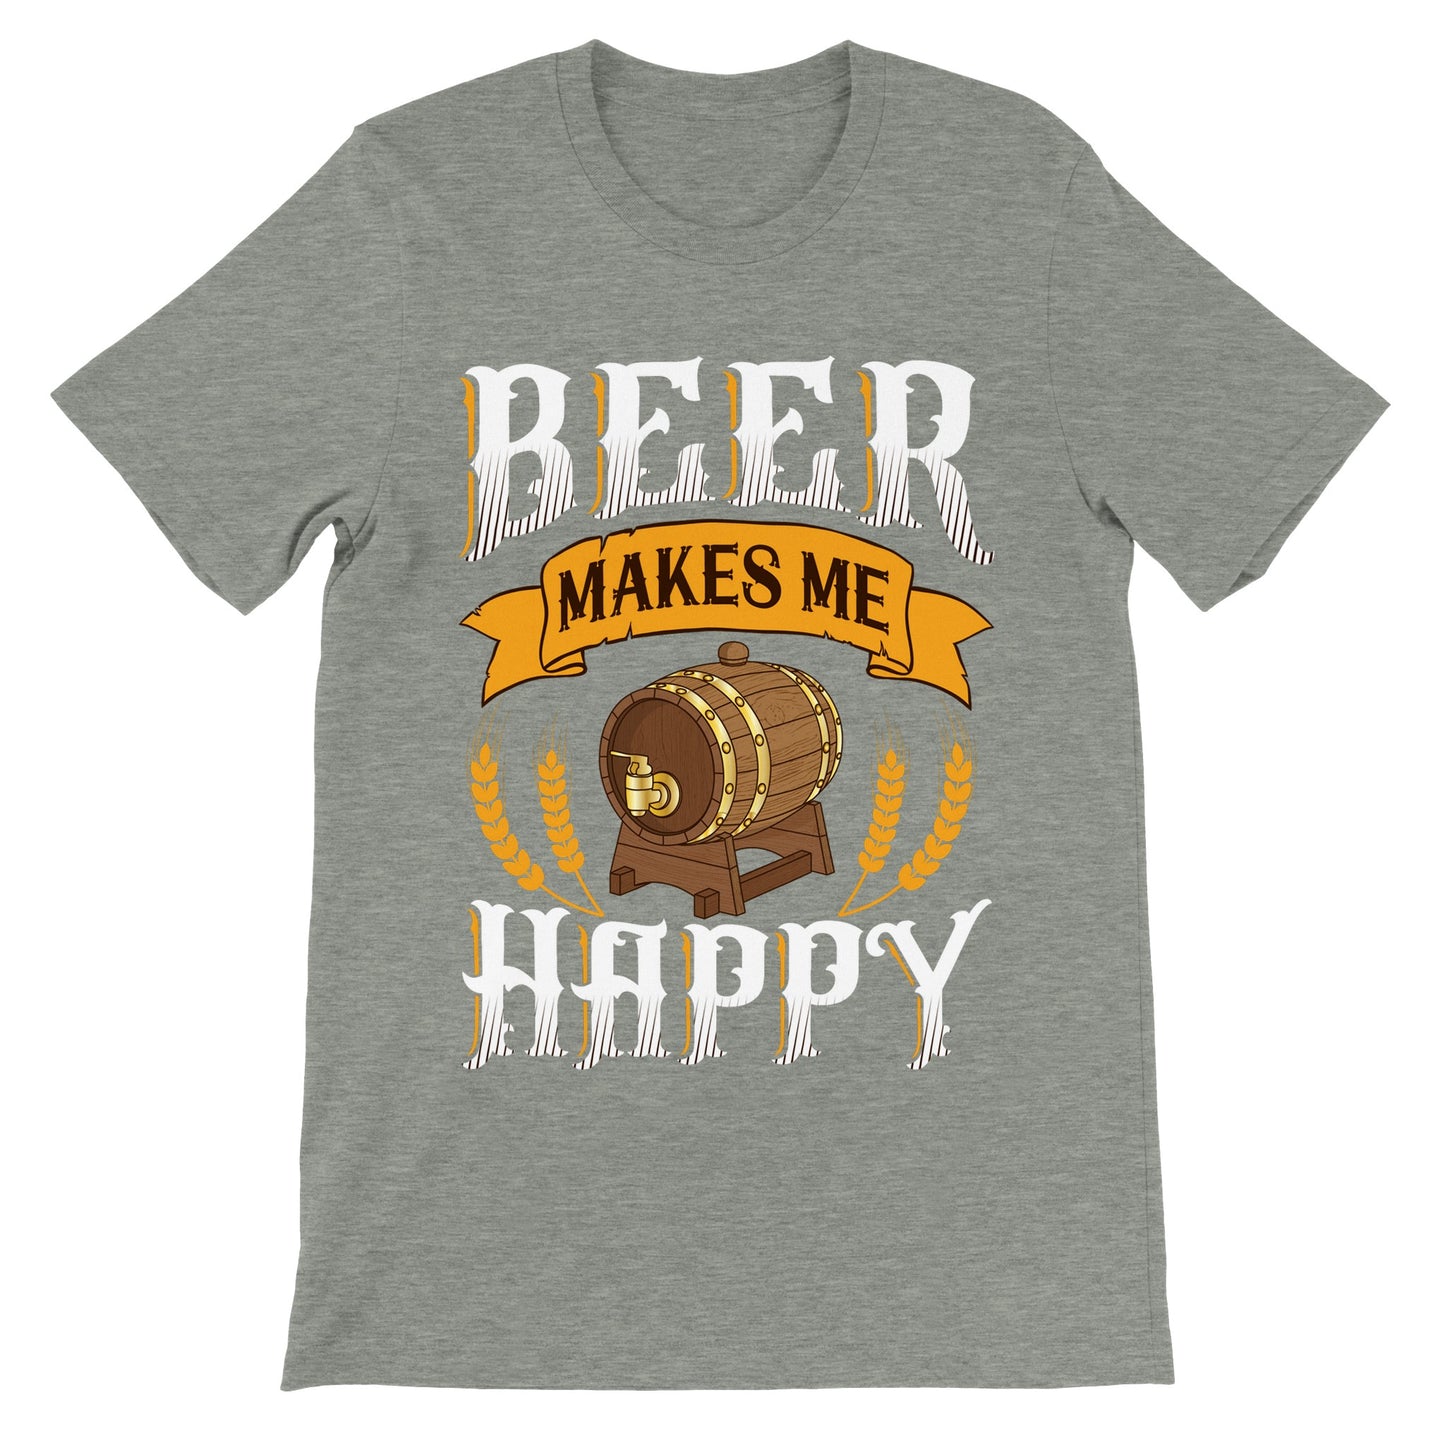 Funny T-shirts - Beer Makes Me Happy - Premium Unisex T-shirt 